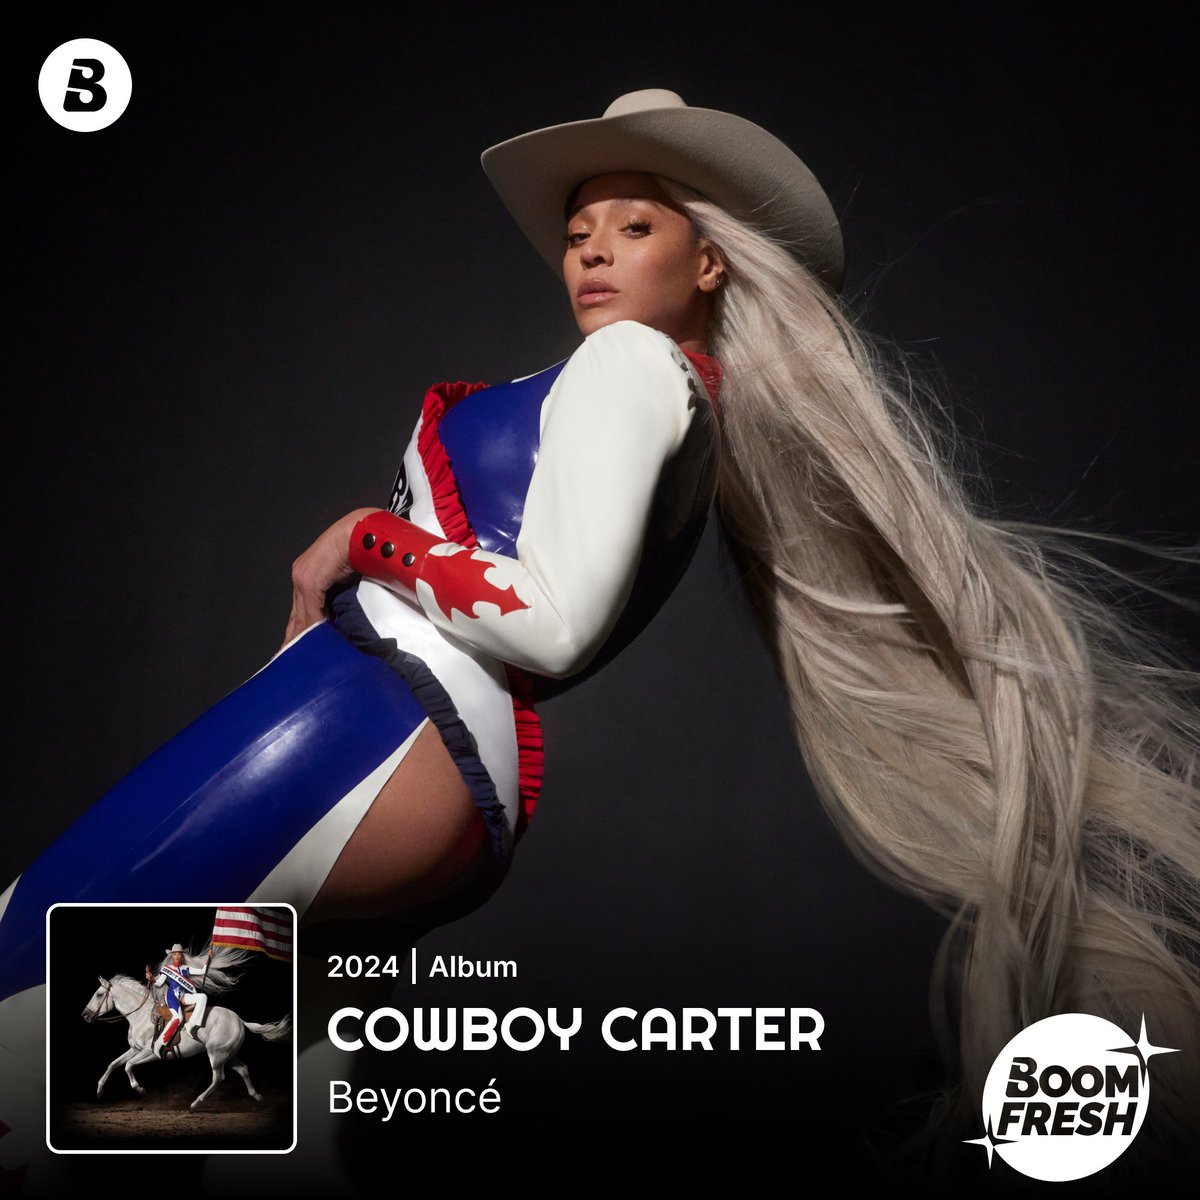 Rodeo time! #COWBOYCARTER by @Beyonce is now available on Boomplay, stream it: Boom.lnk.to/COWBOYCARTER #Boomplay #Boomfresh #Beyonce